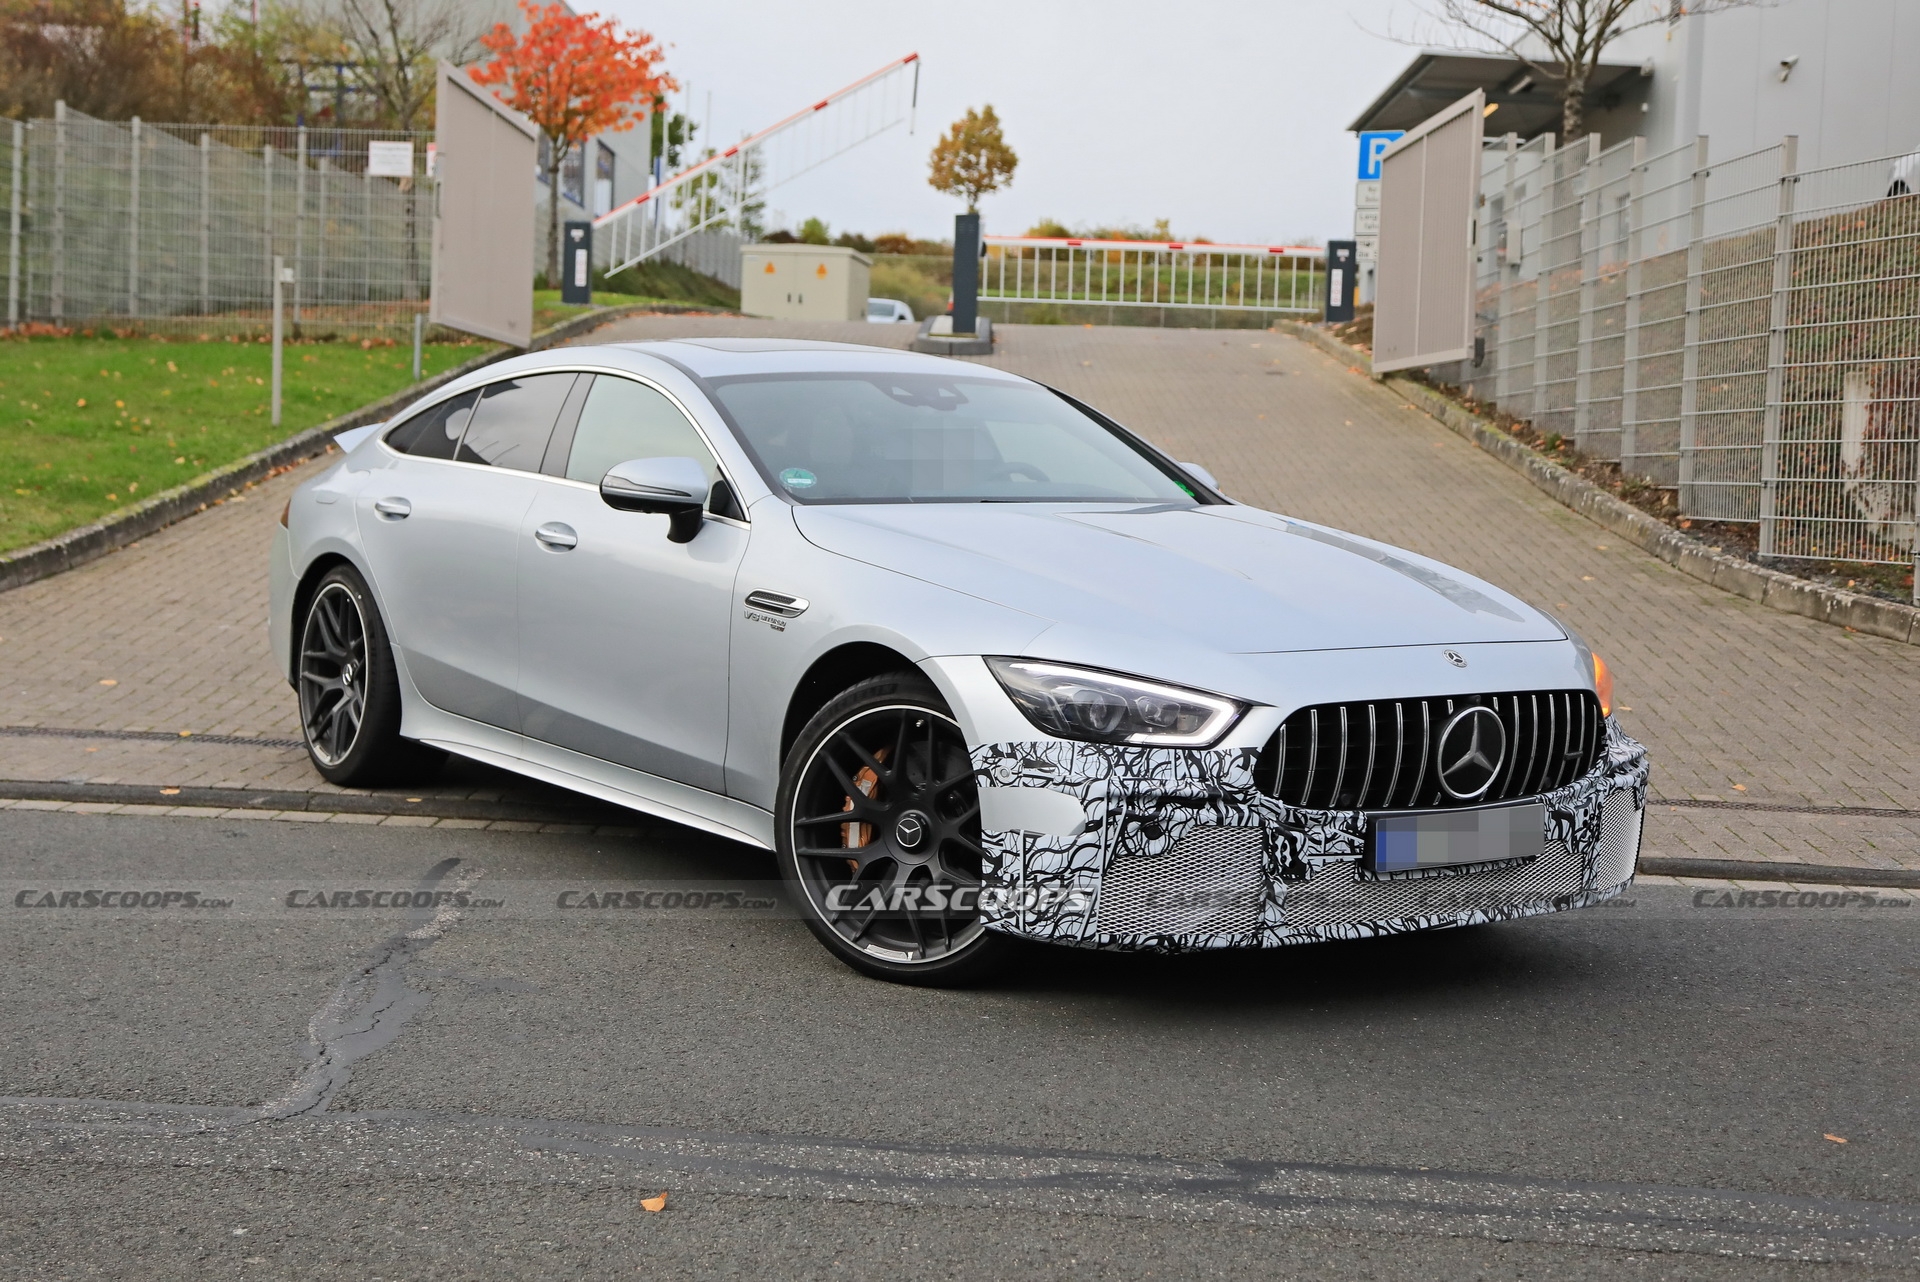 Mercedes-AMG GT 63 S restyling prototipo foto spia